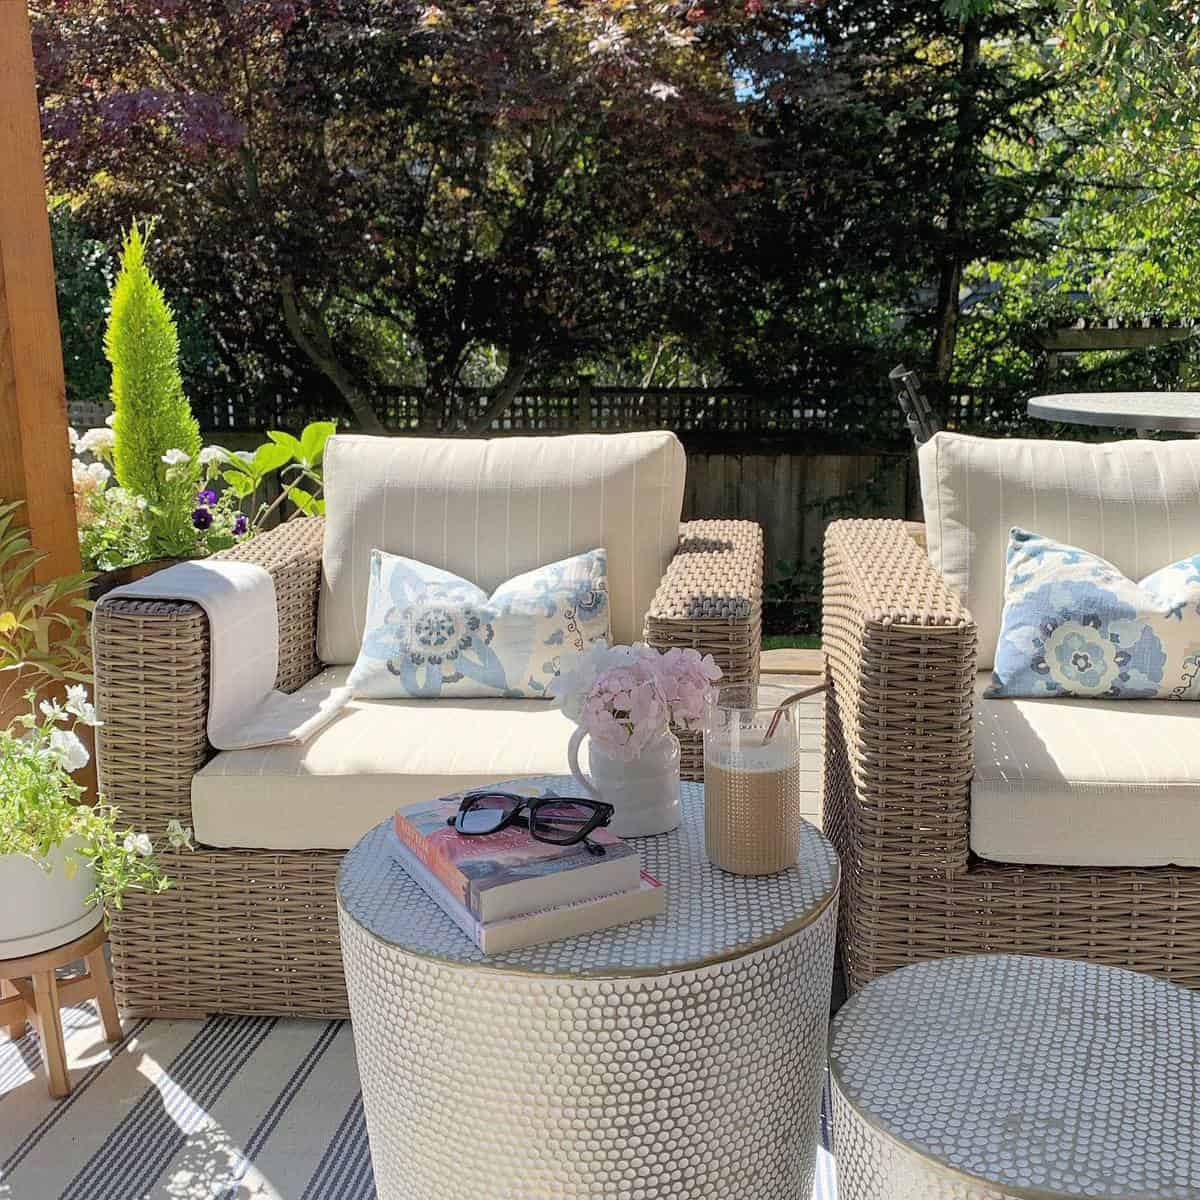 Patio decor tables and chairs